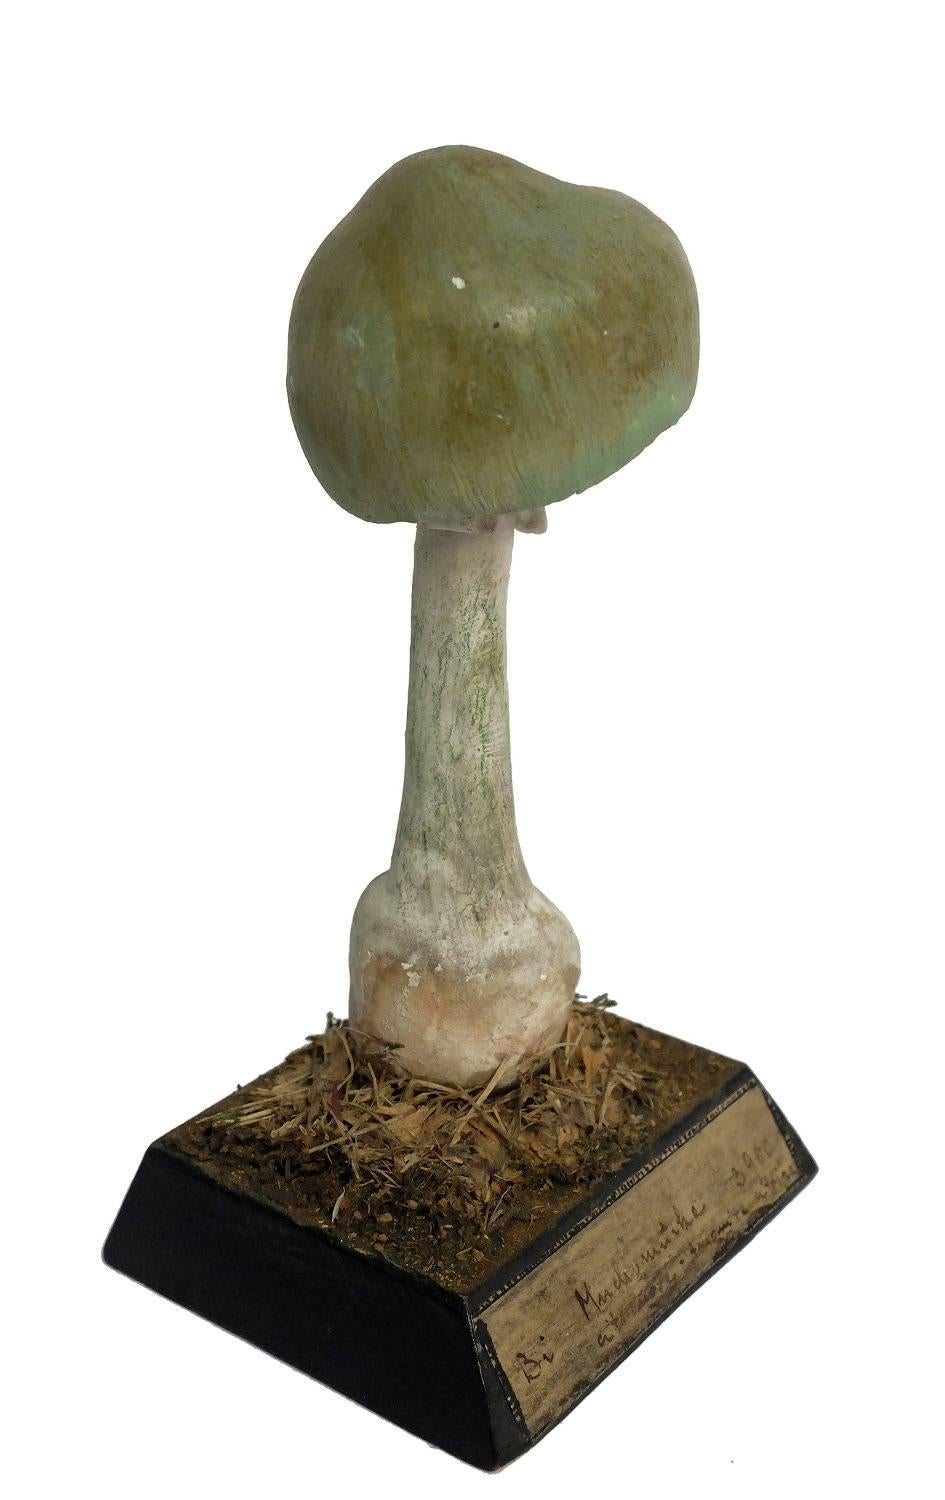 A model for pharmacy of mushroom specimen Ammunite Citrina. Made out of plaster watercolored. Square wooden black base with moss and hay. It shows on the front one label with the scientific name of the specimen handwritten with ink. 